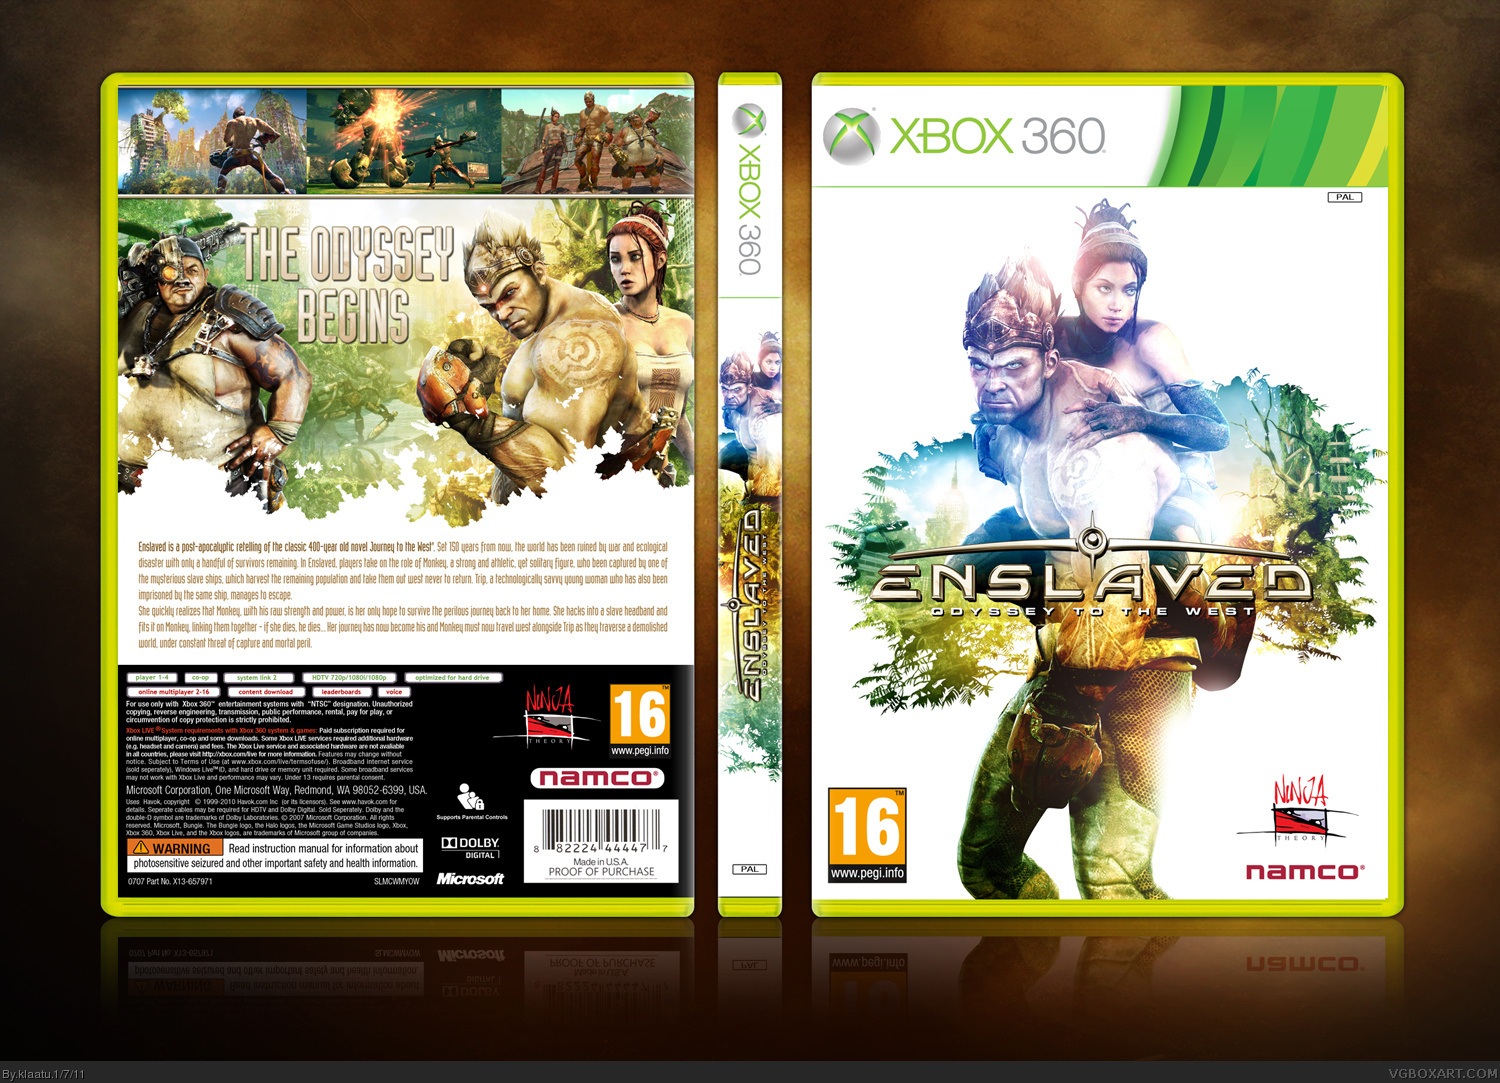 Enslaved: Odyssey to the West box cover